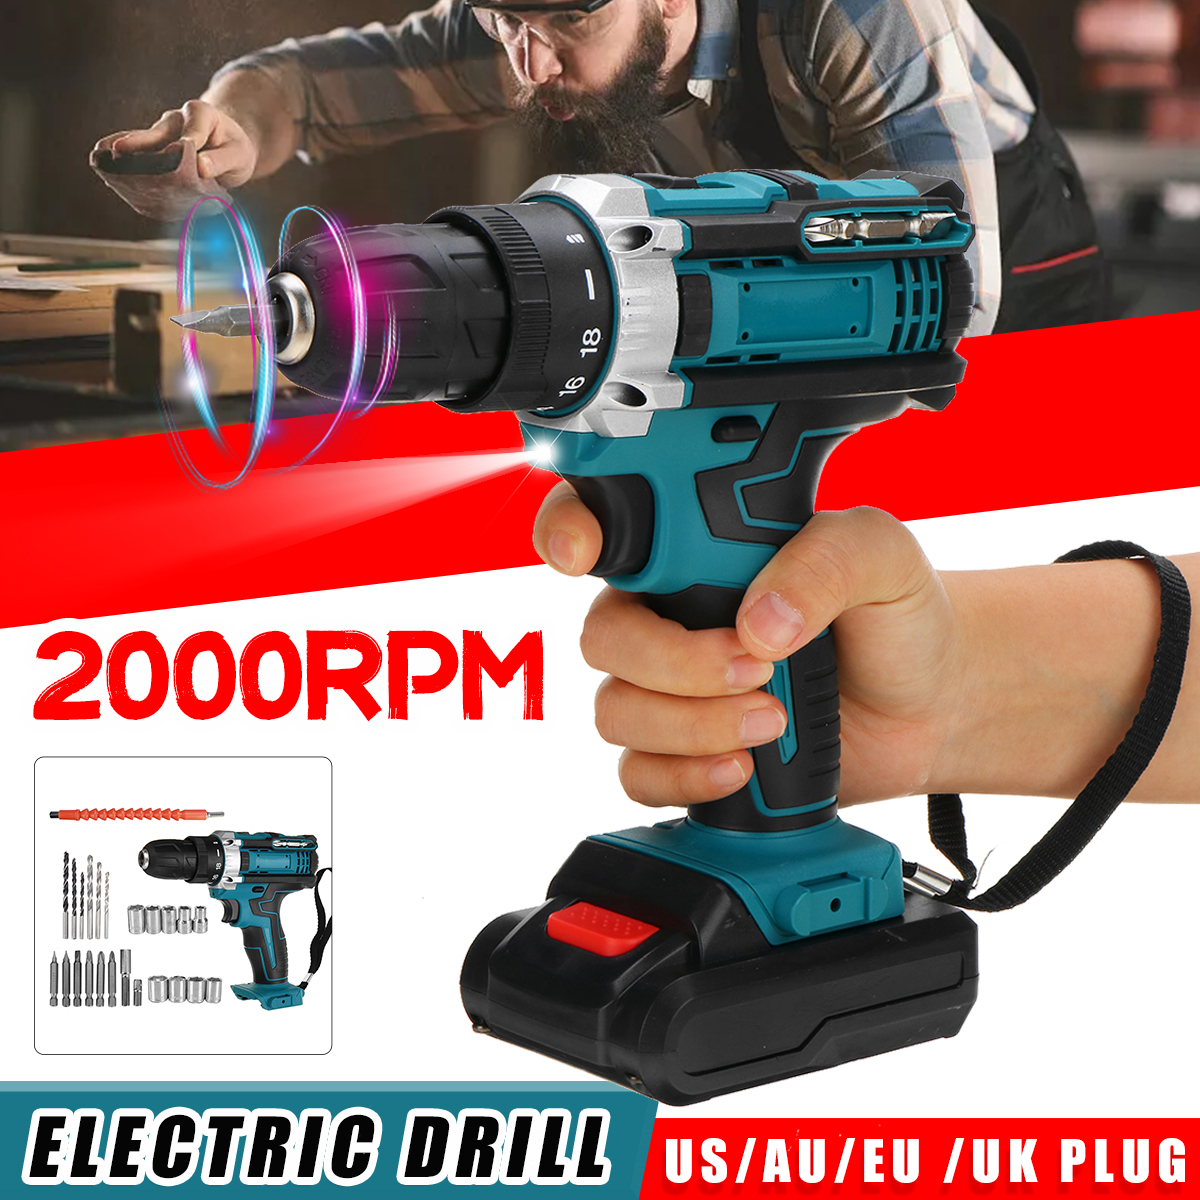 2000rpm-Impact-Drill-Driver-Rechargeable-Electric-Screwdriver-Portable-Wood-Metal-Drilling-Tool-w-1p-1852108-2